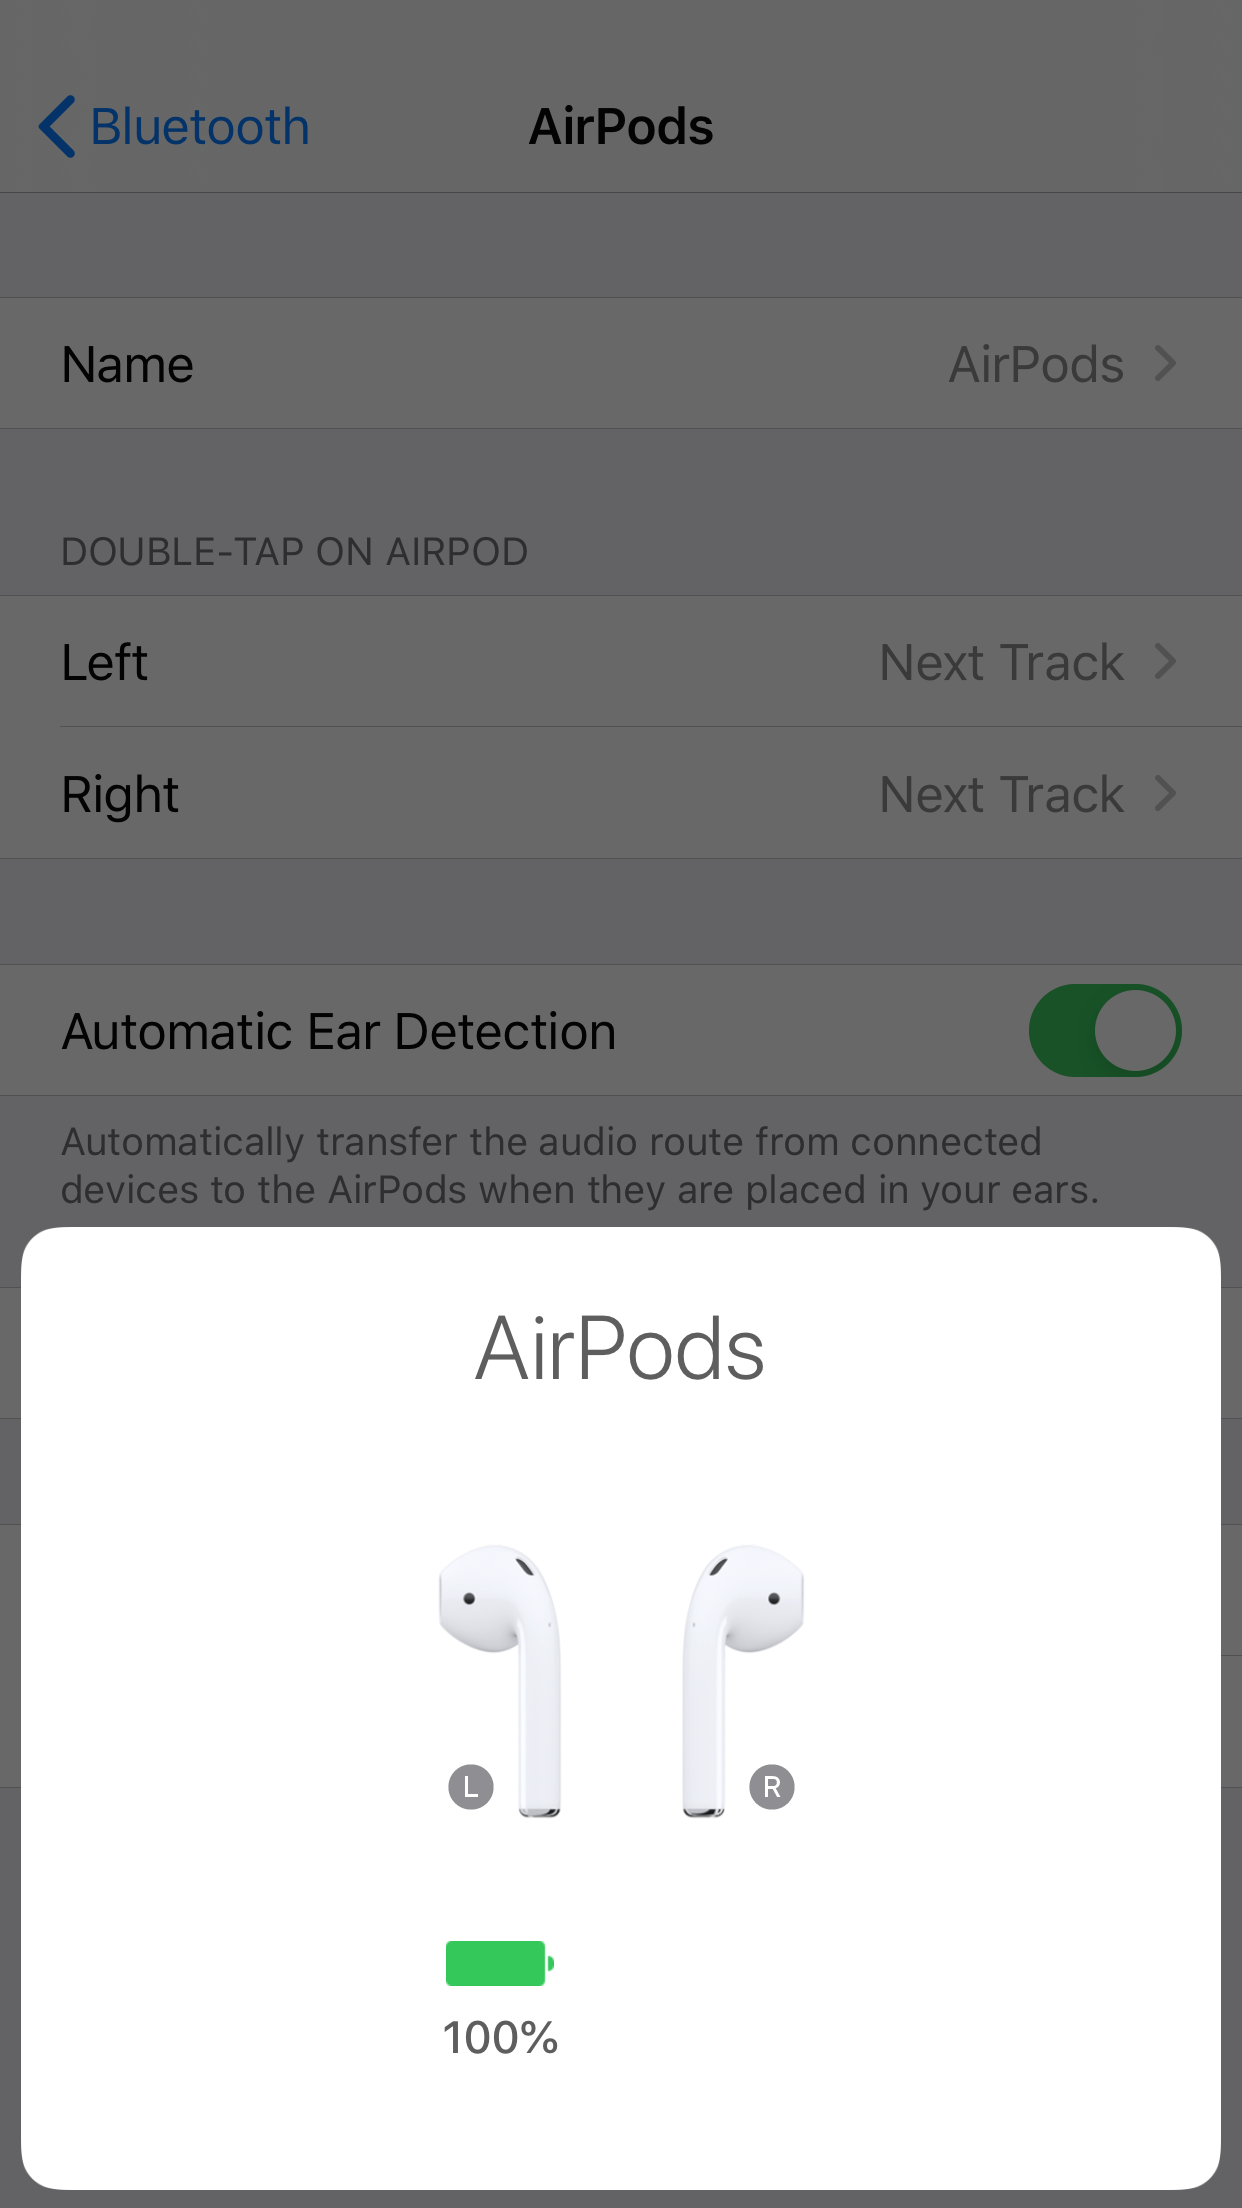 eith my AirPod not working - Apple Community